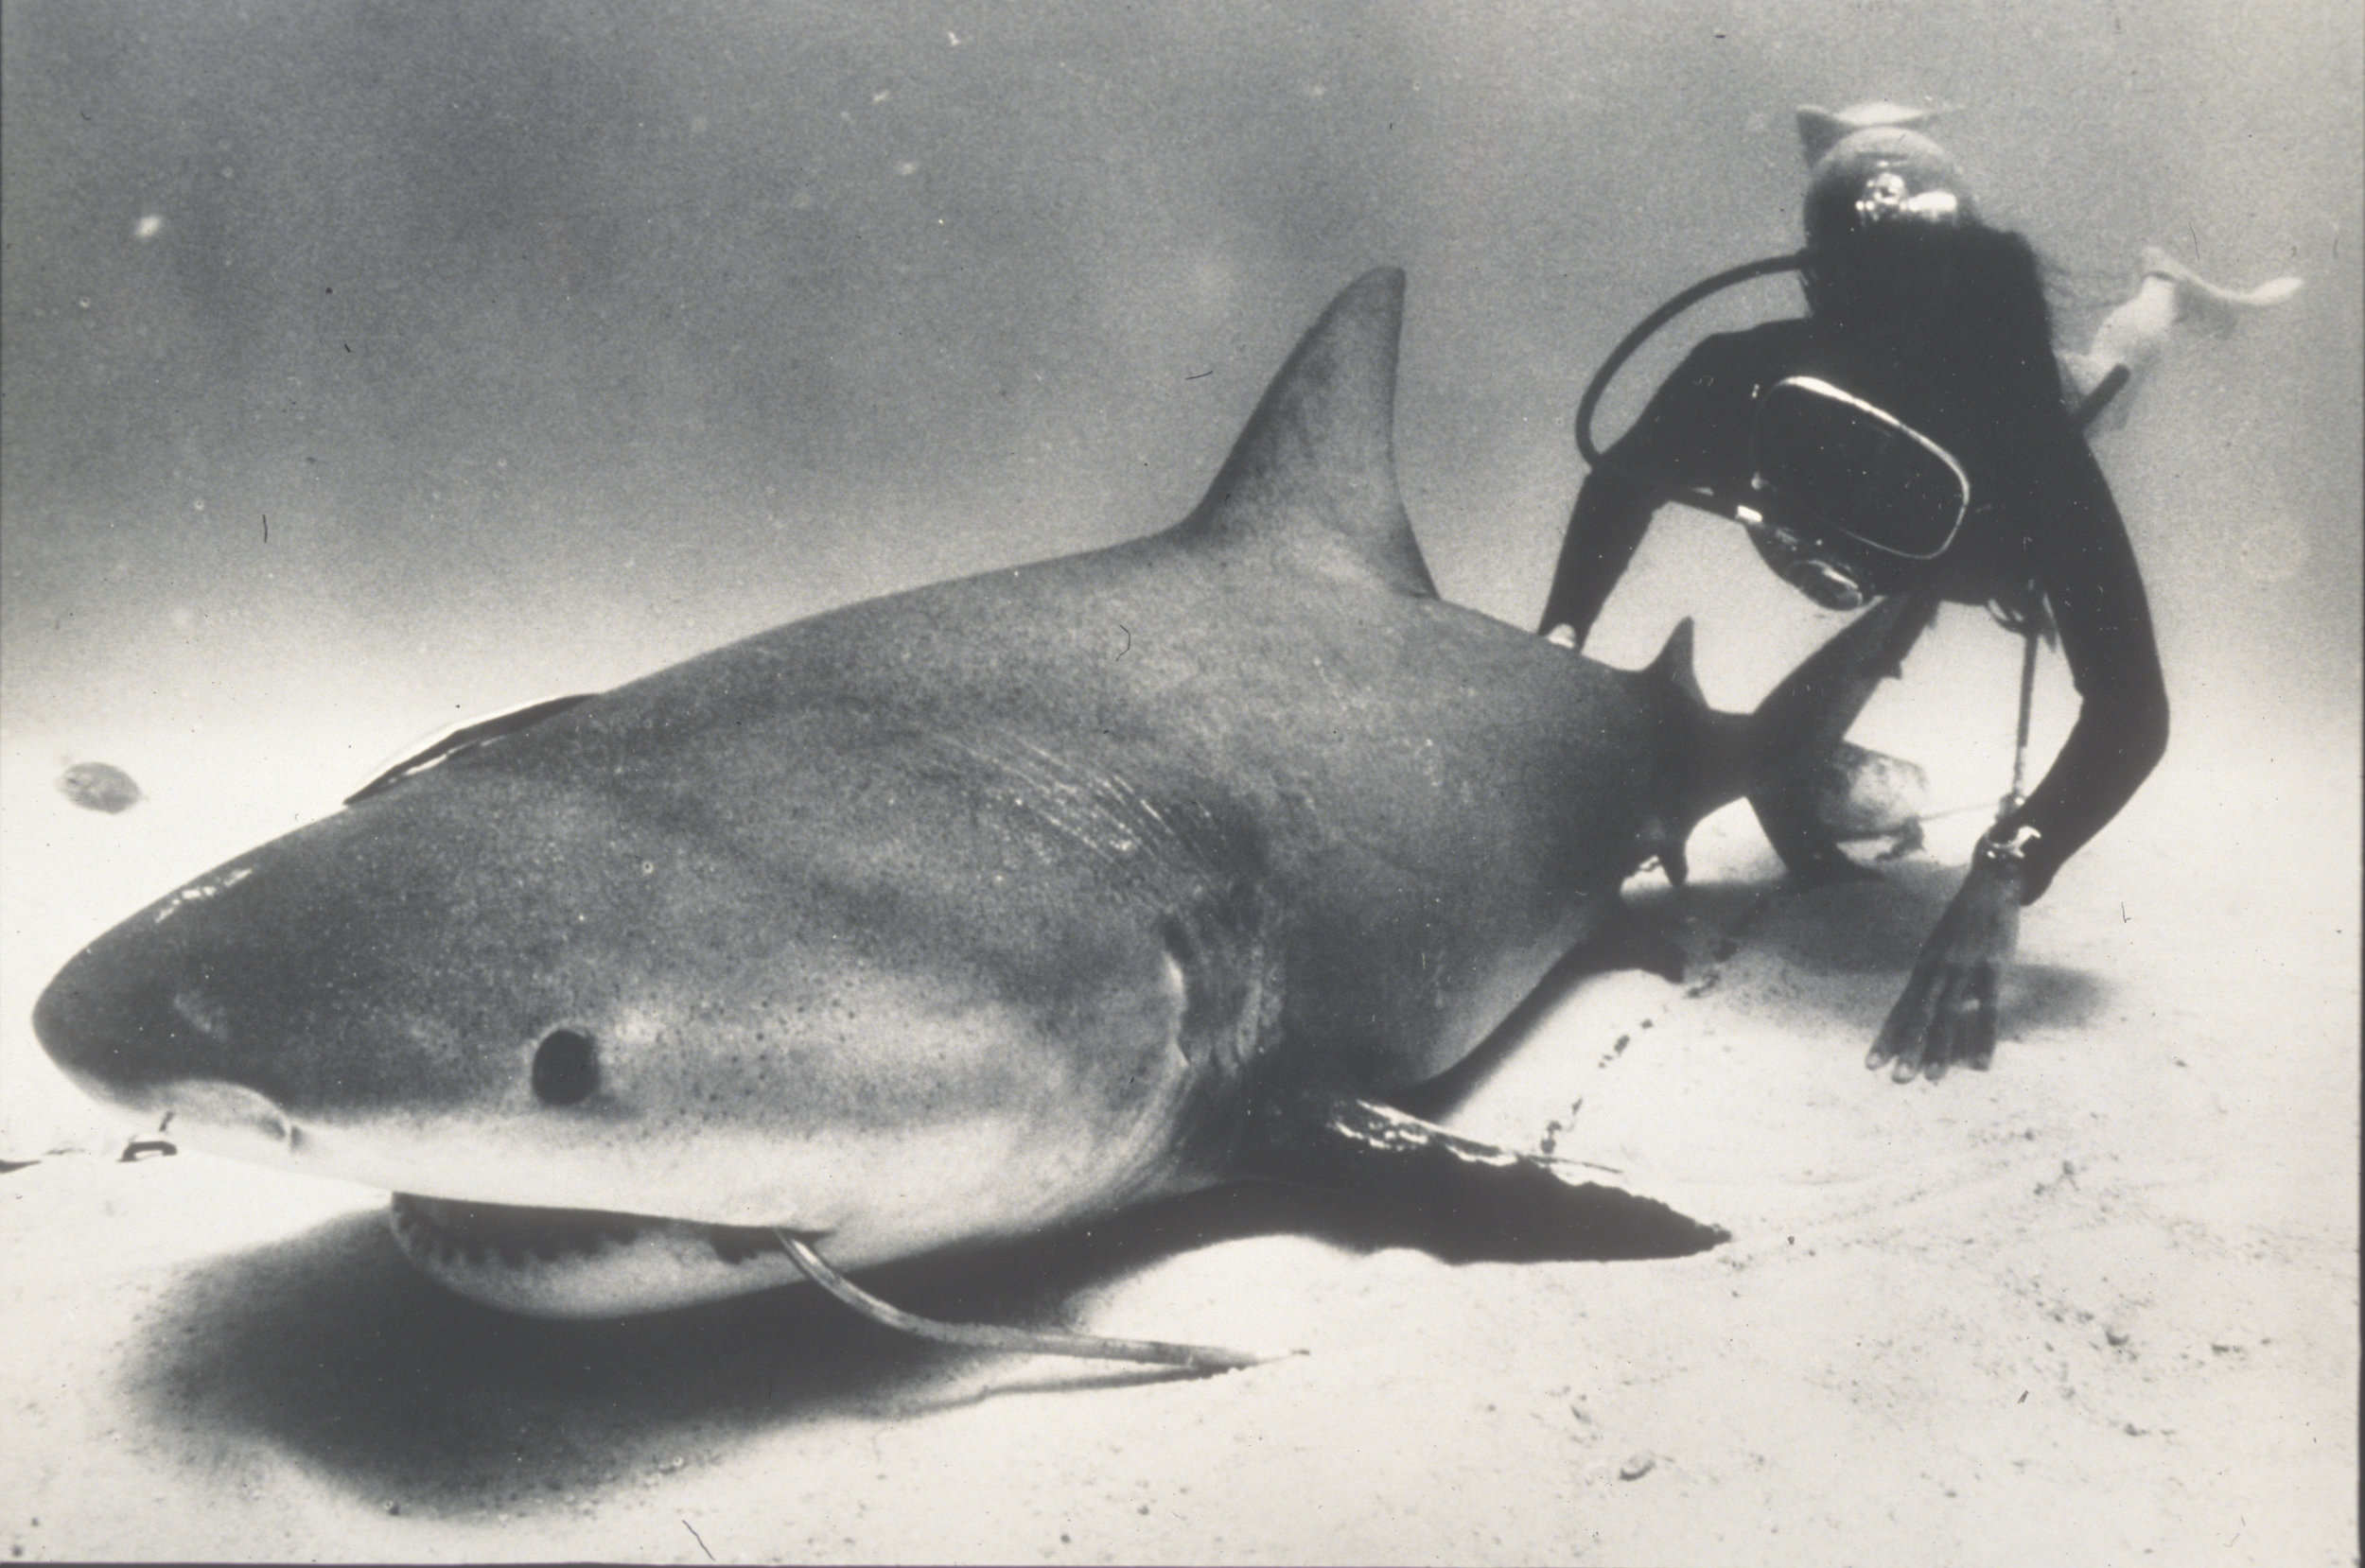 Genie inspects a bull shark caught on a line in Mexico